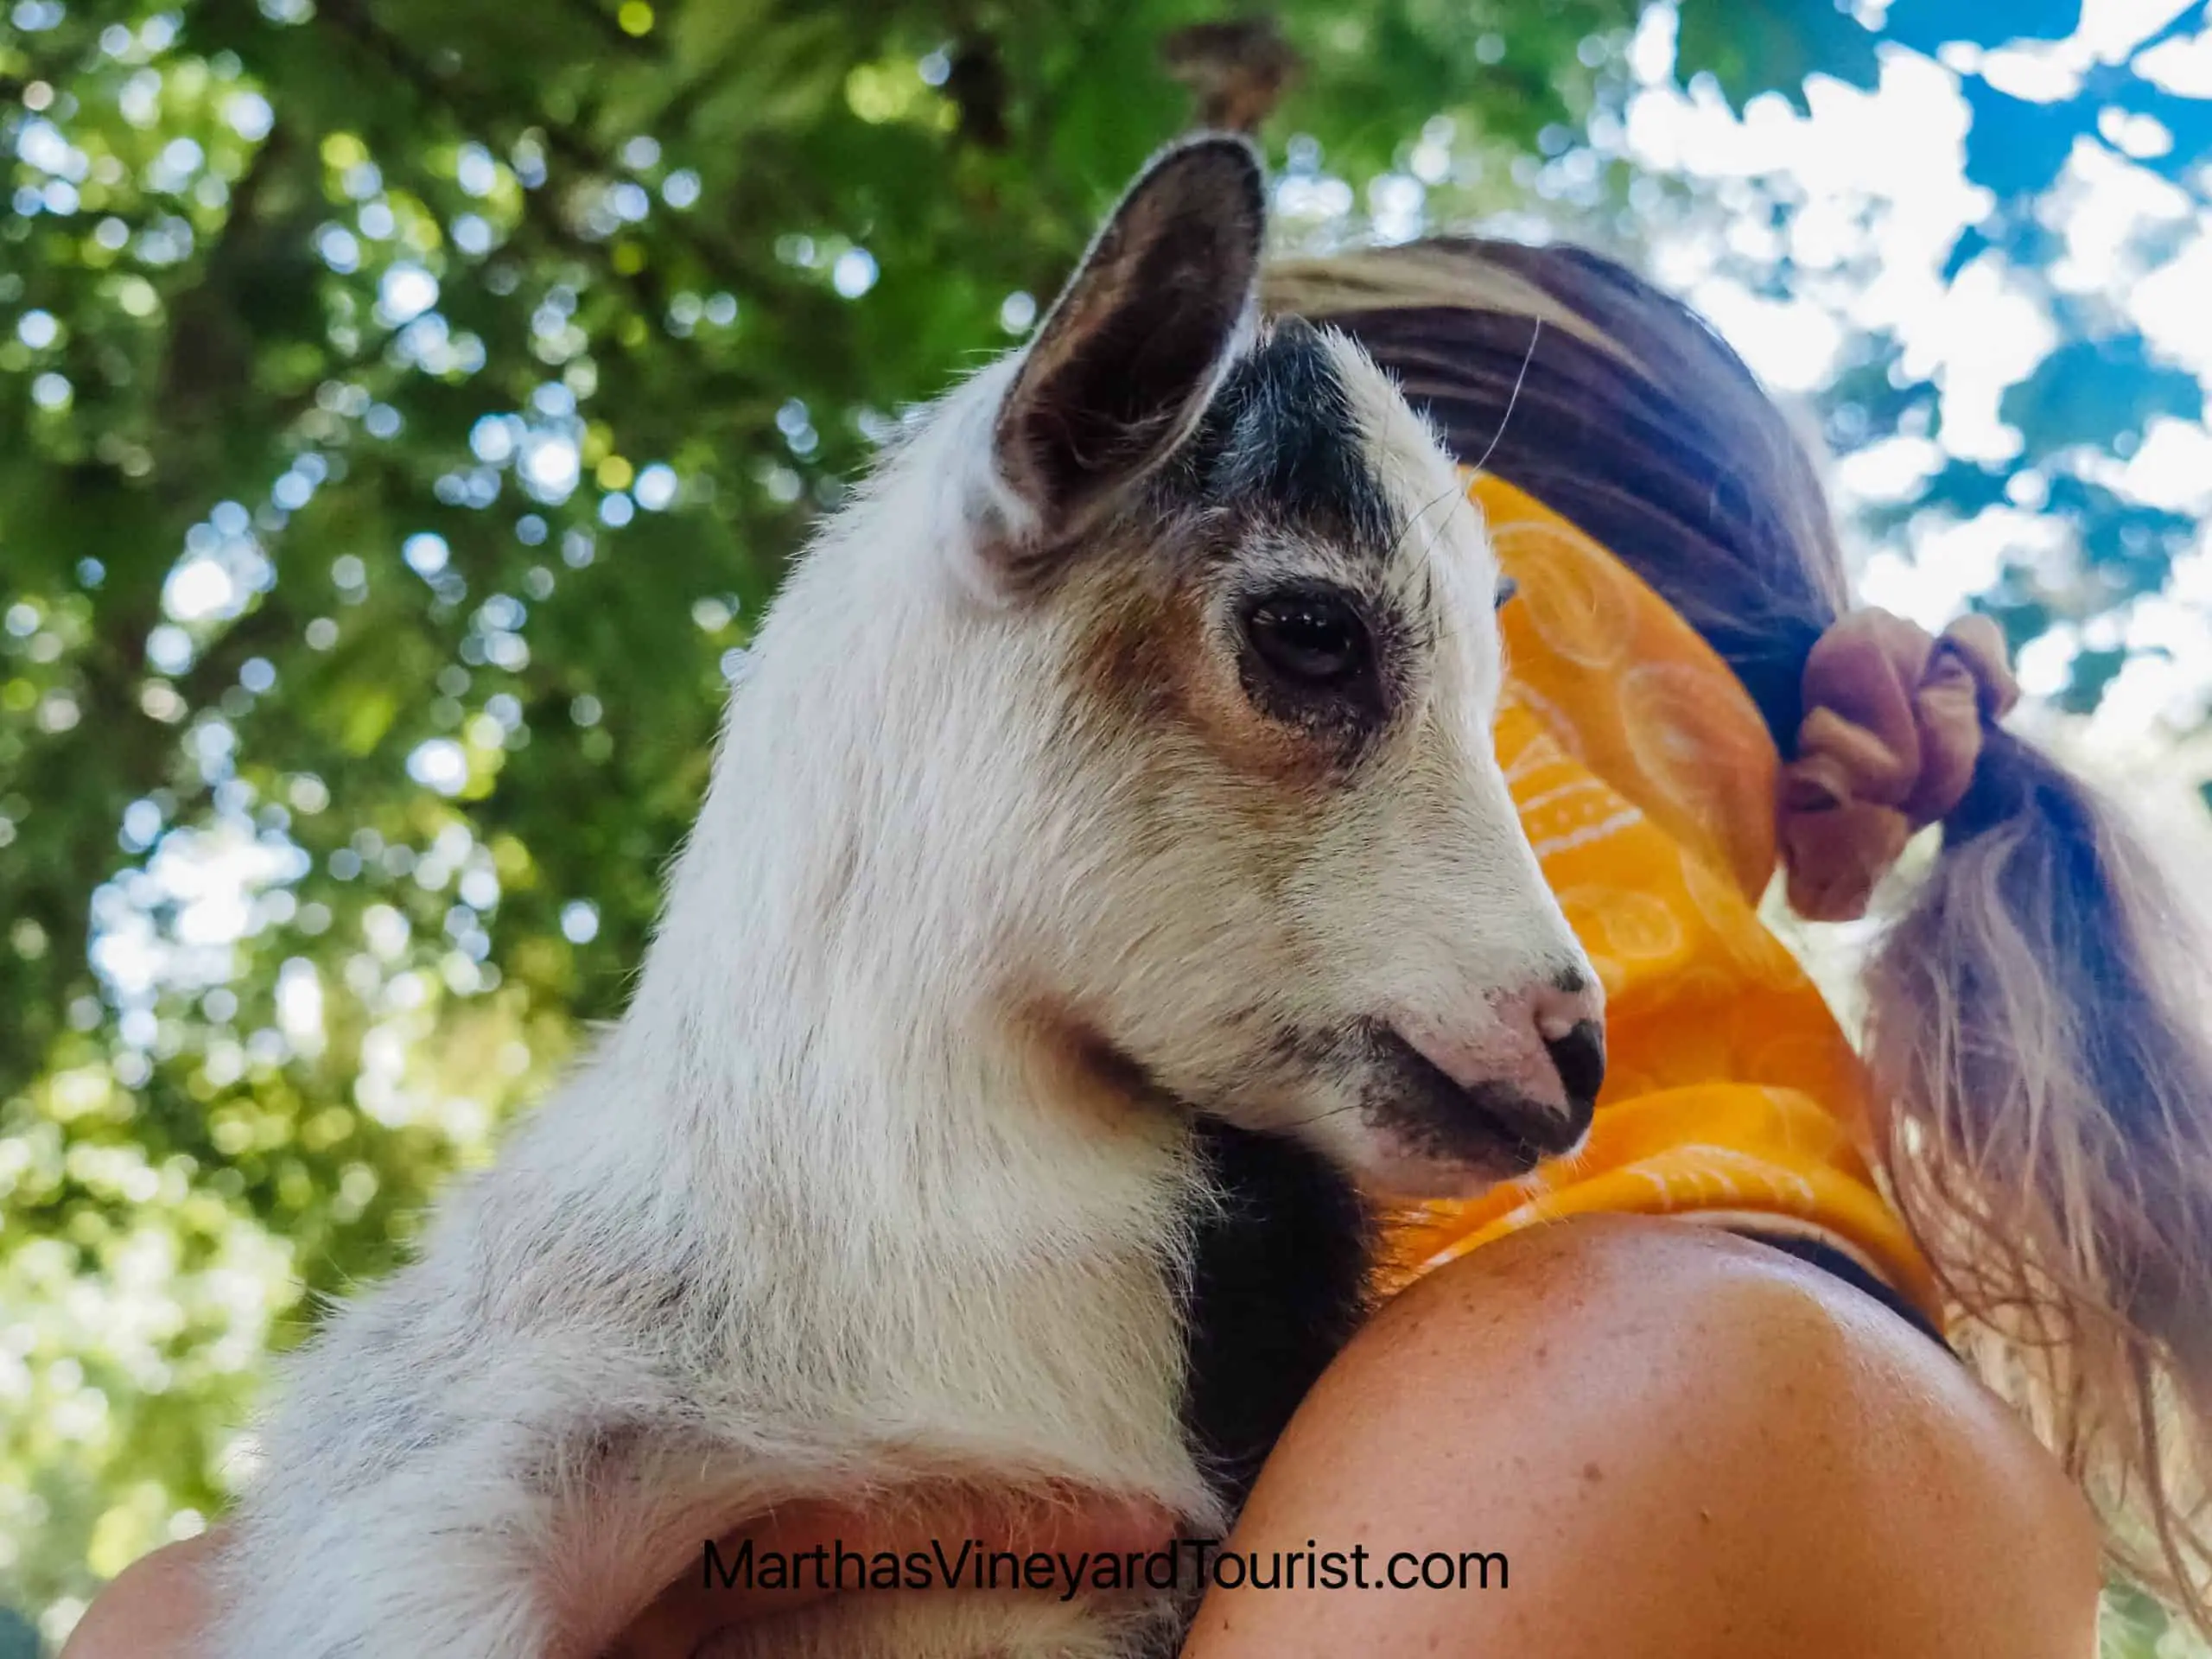 Holding a baby goat at Native Earth Teaching Farm